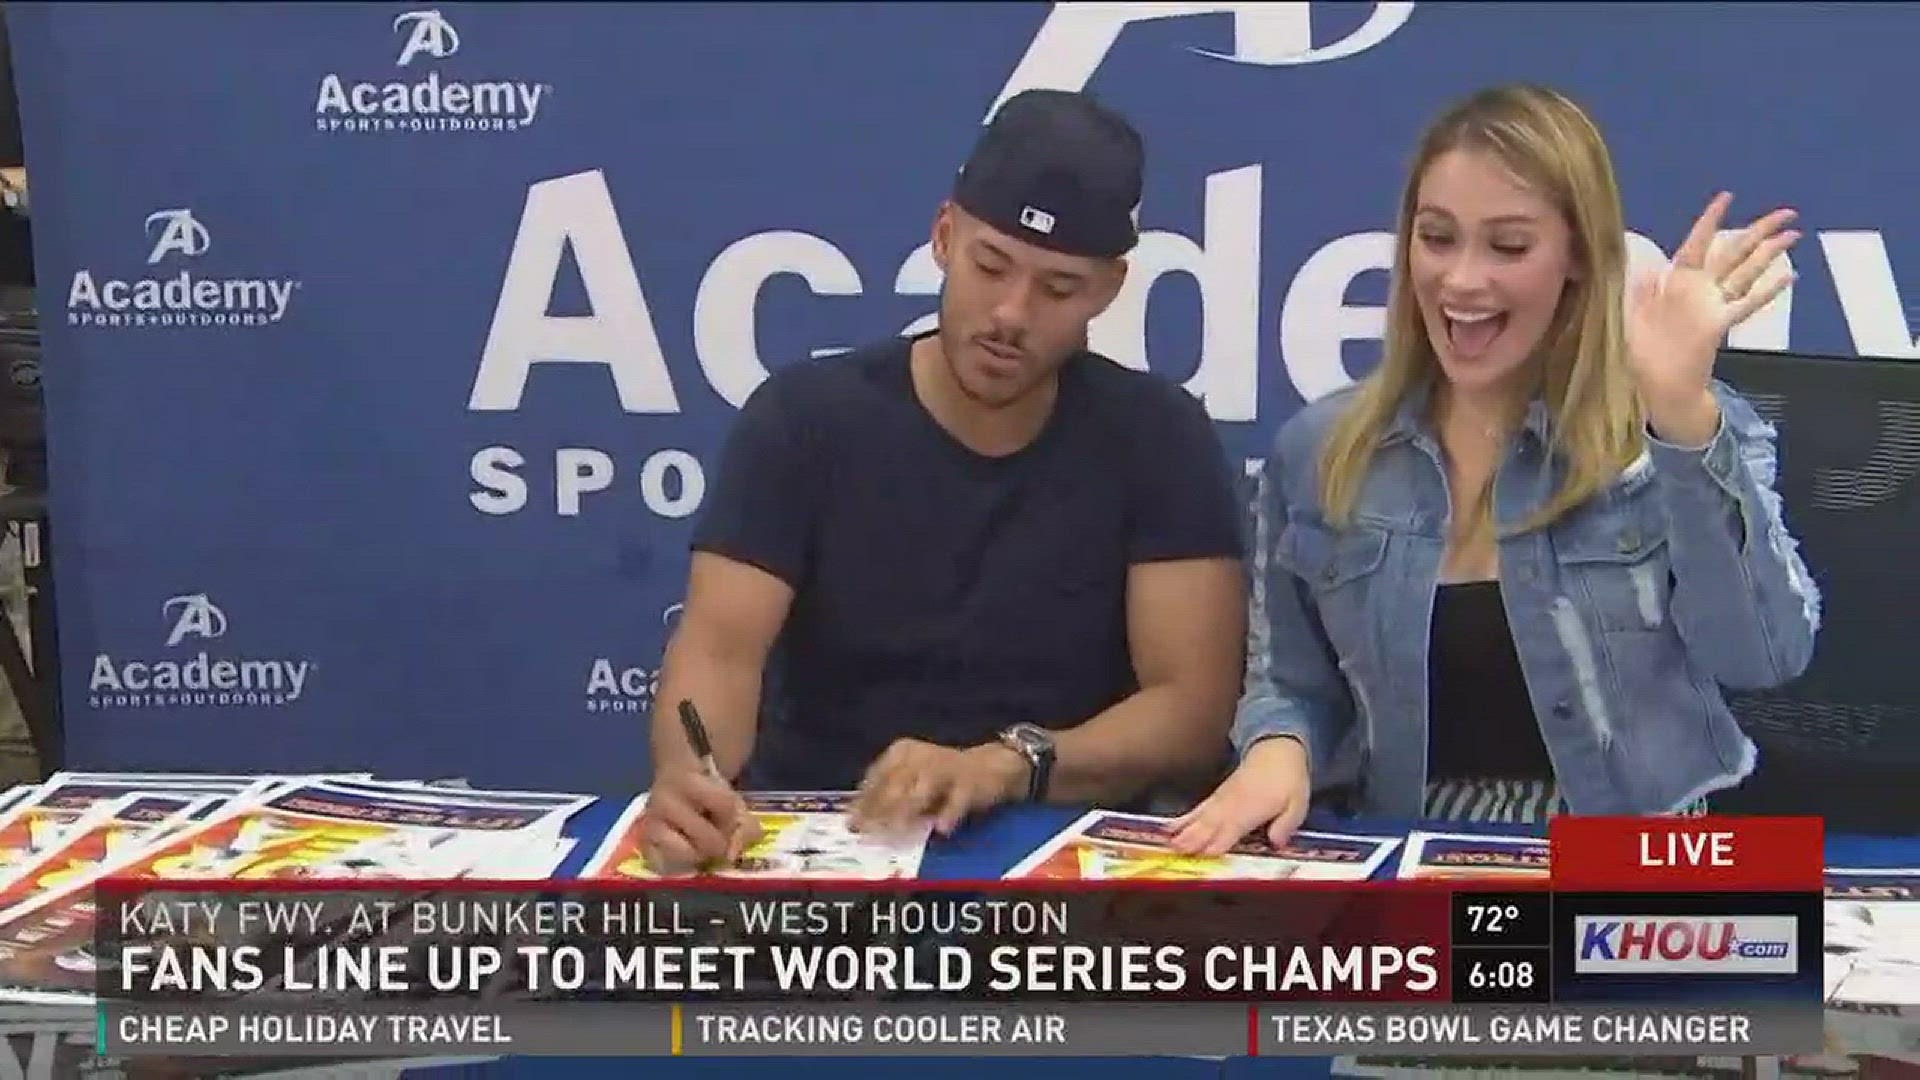 Astros fans lined up at Academy Wednesday to get autographs from World Series champion Carlos Correa.